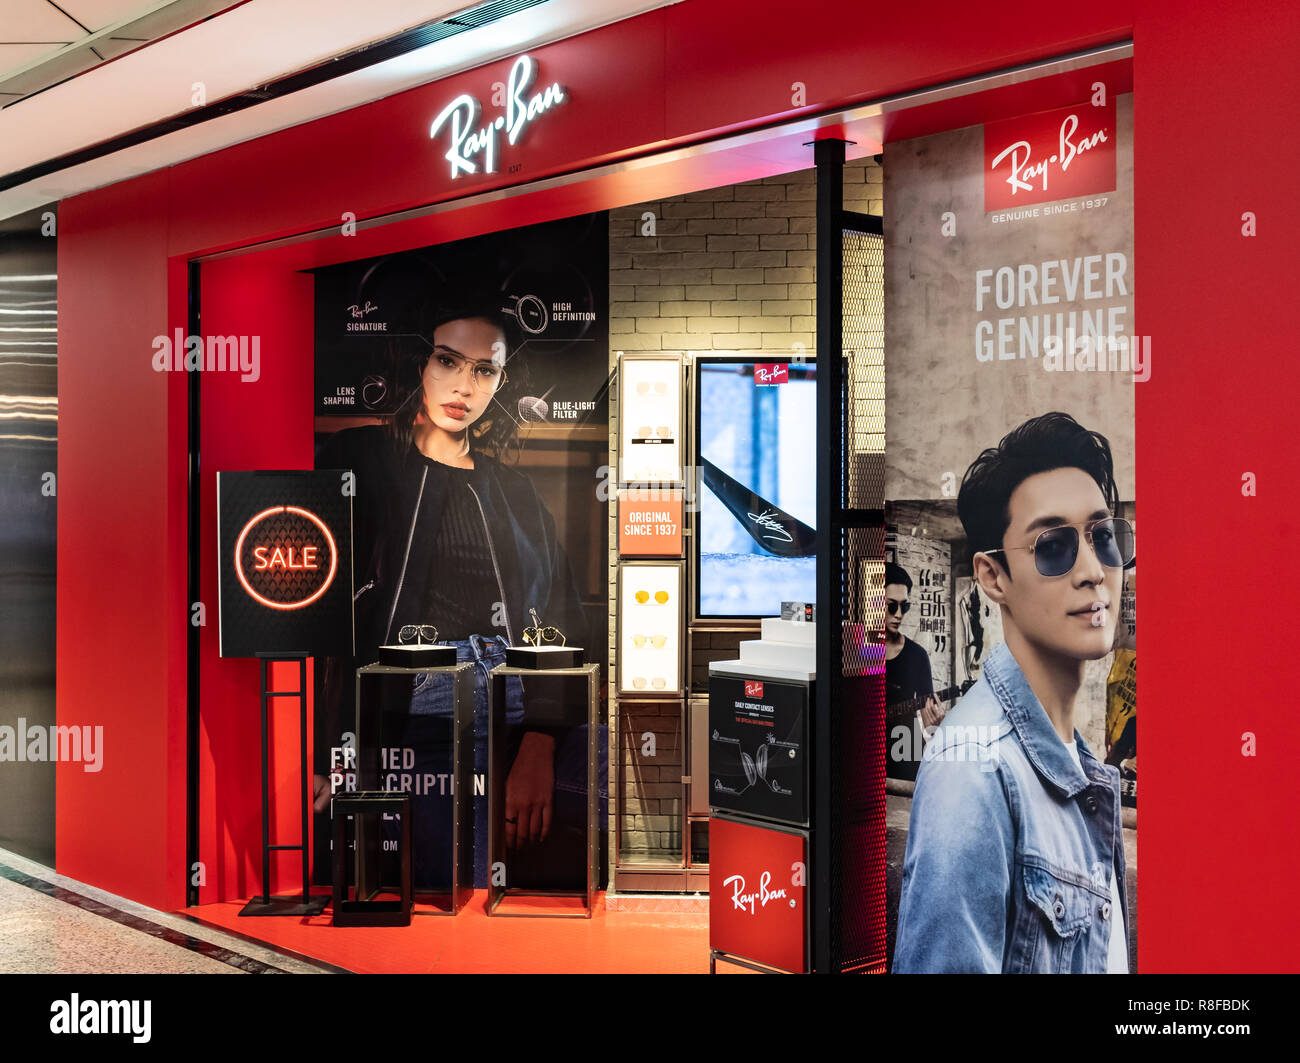 www ray ban com store